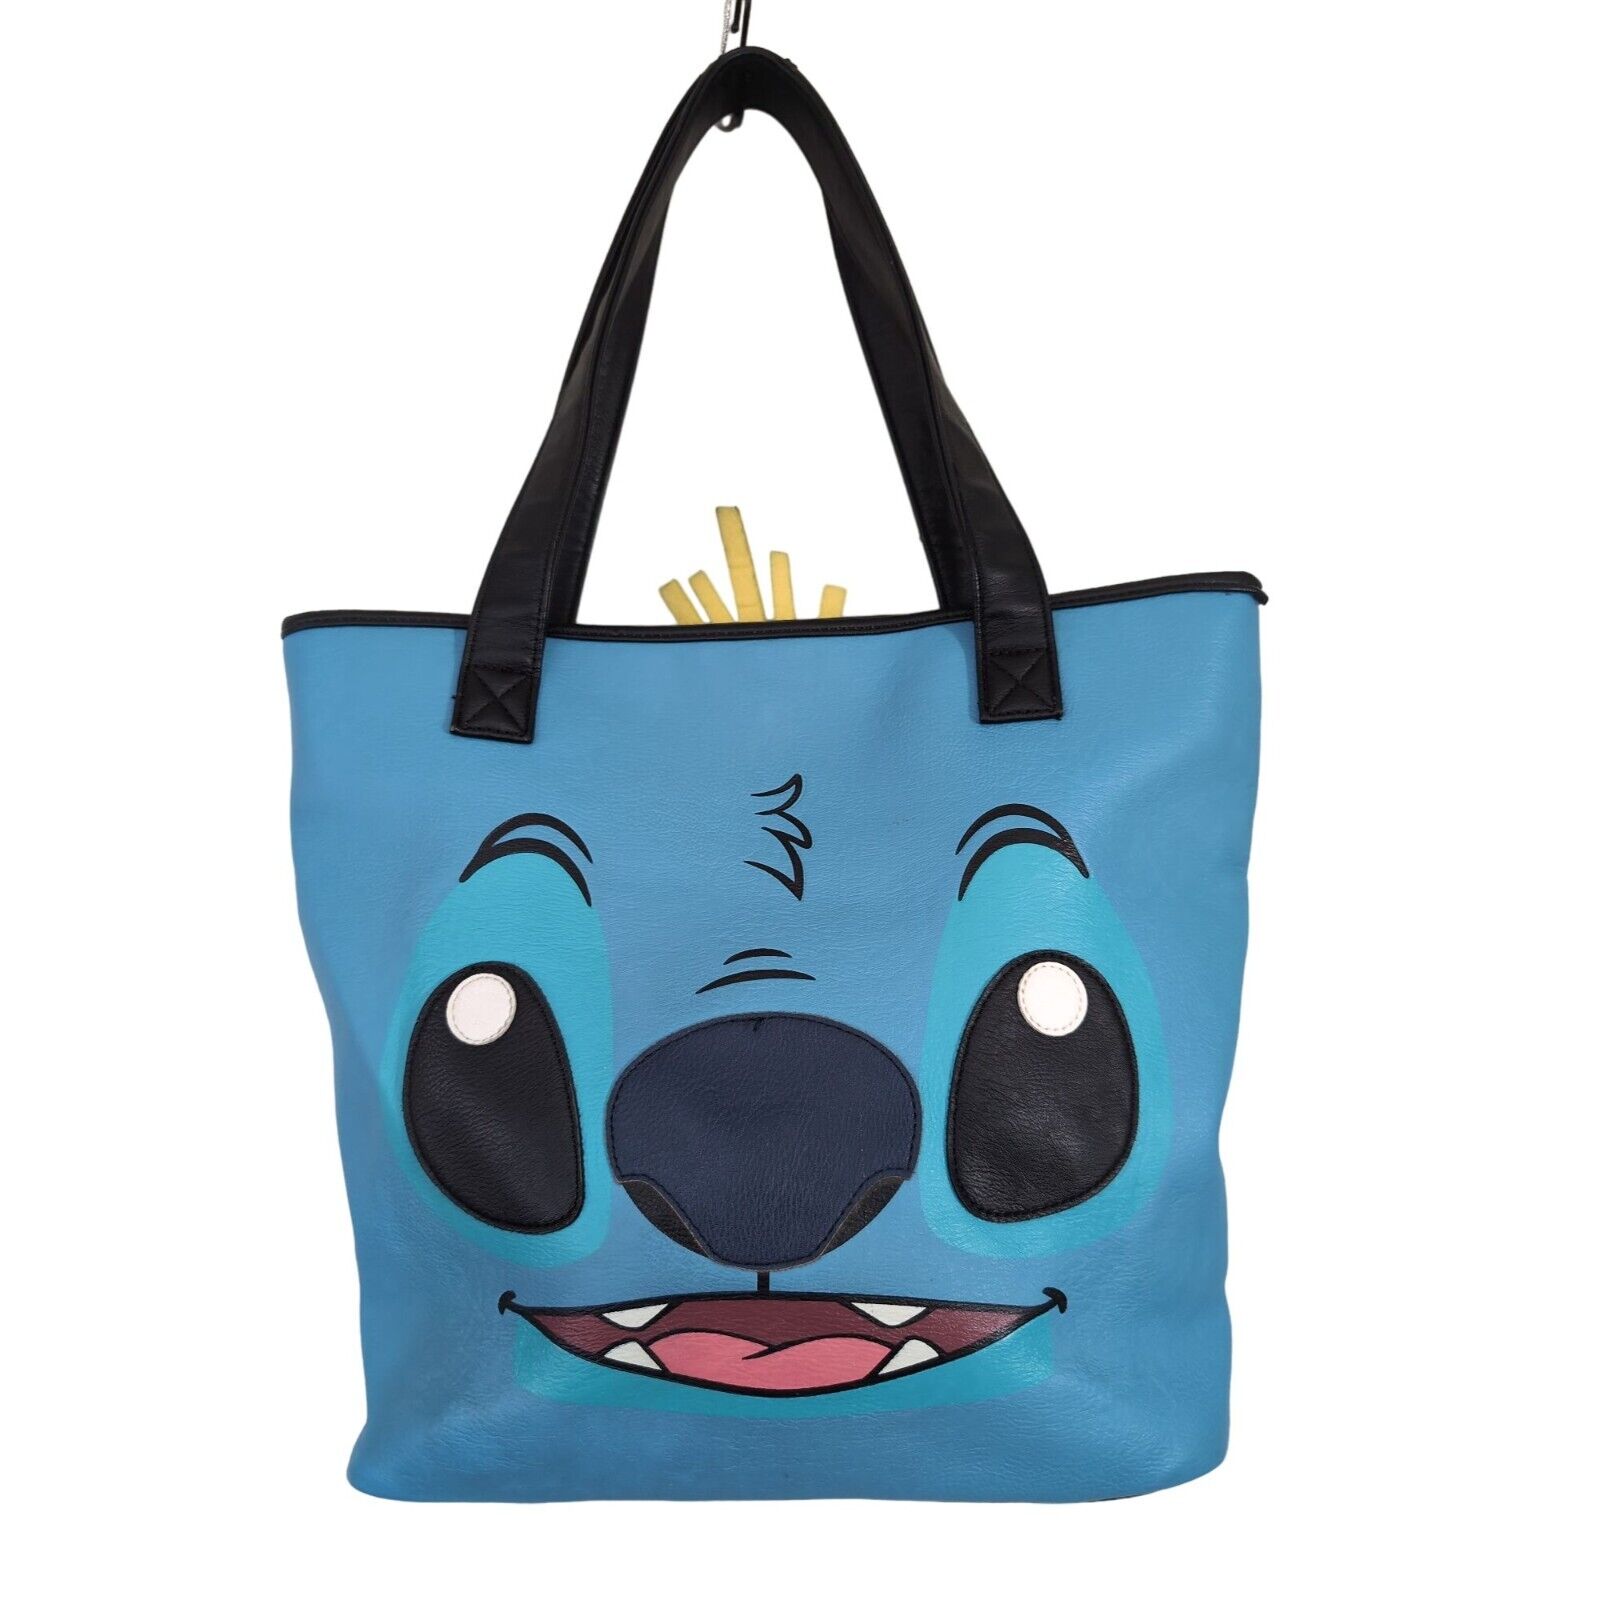 Disney Loungefly Stitch Scrump Tote Bag Dual Face Blue Faux Leather